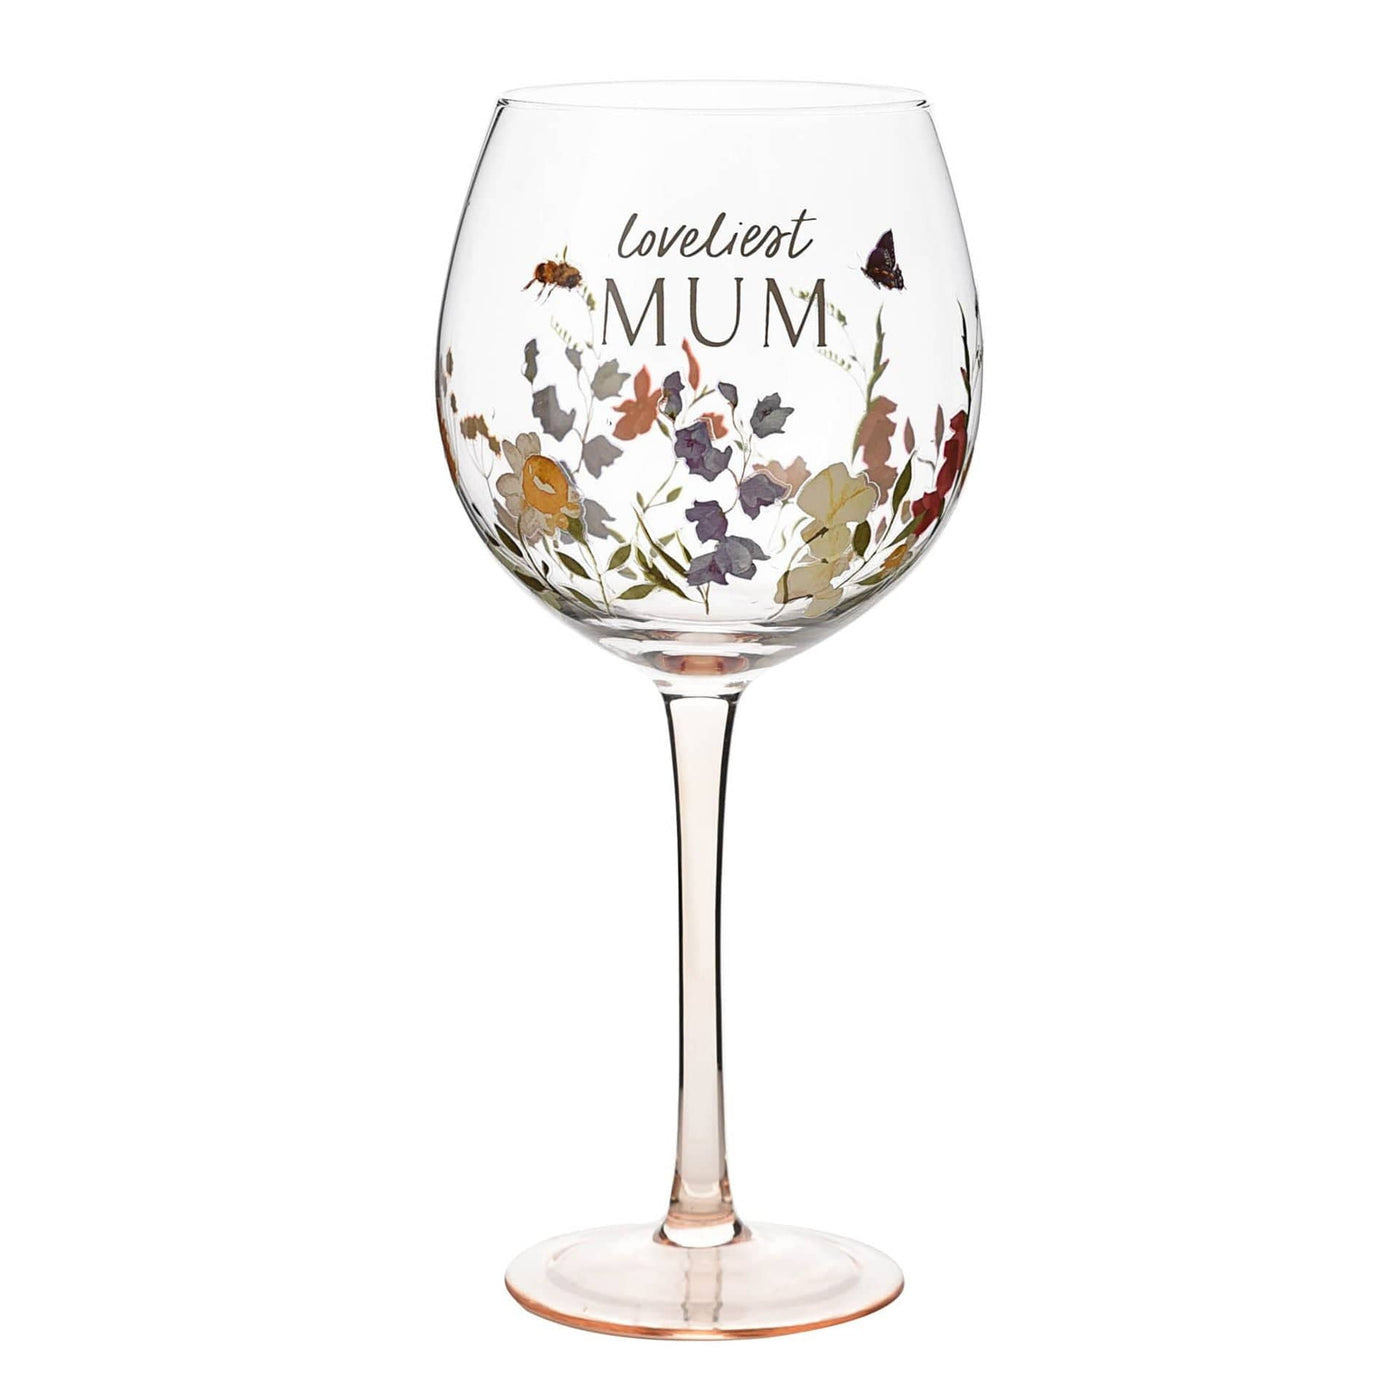 Widdop Gifts Glassware Loveliest Mum Floral Gin Glass in Gift Box